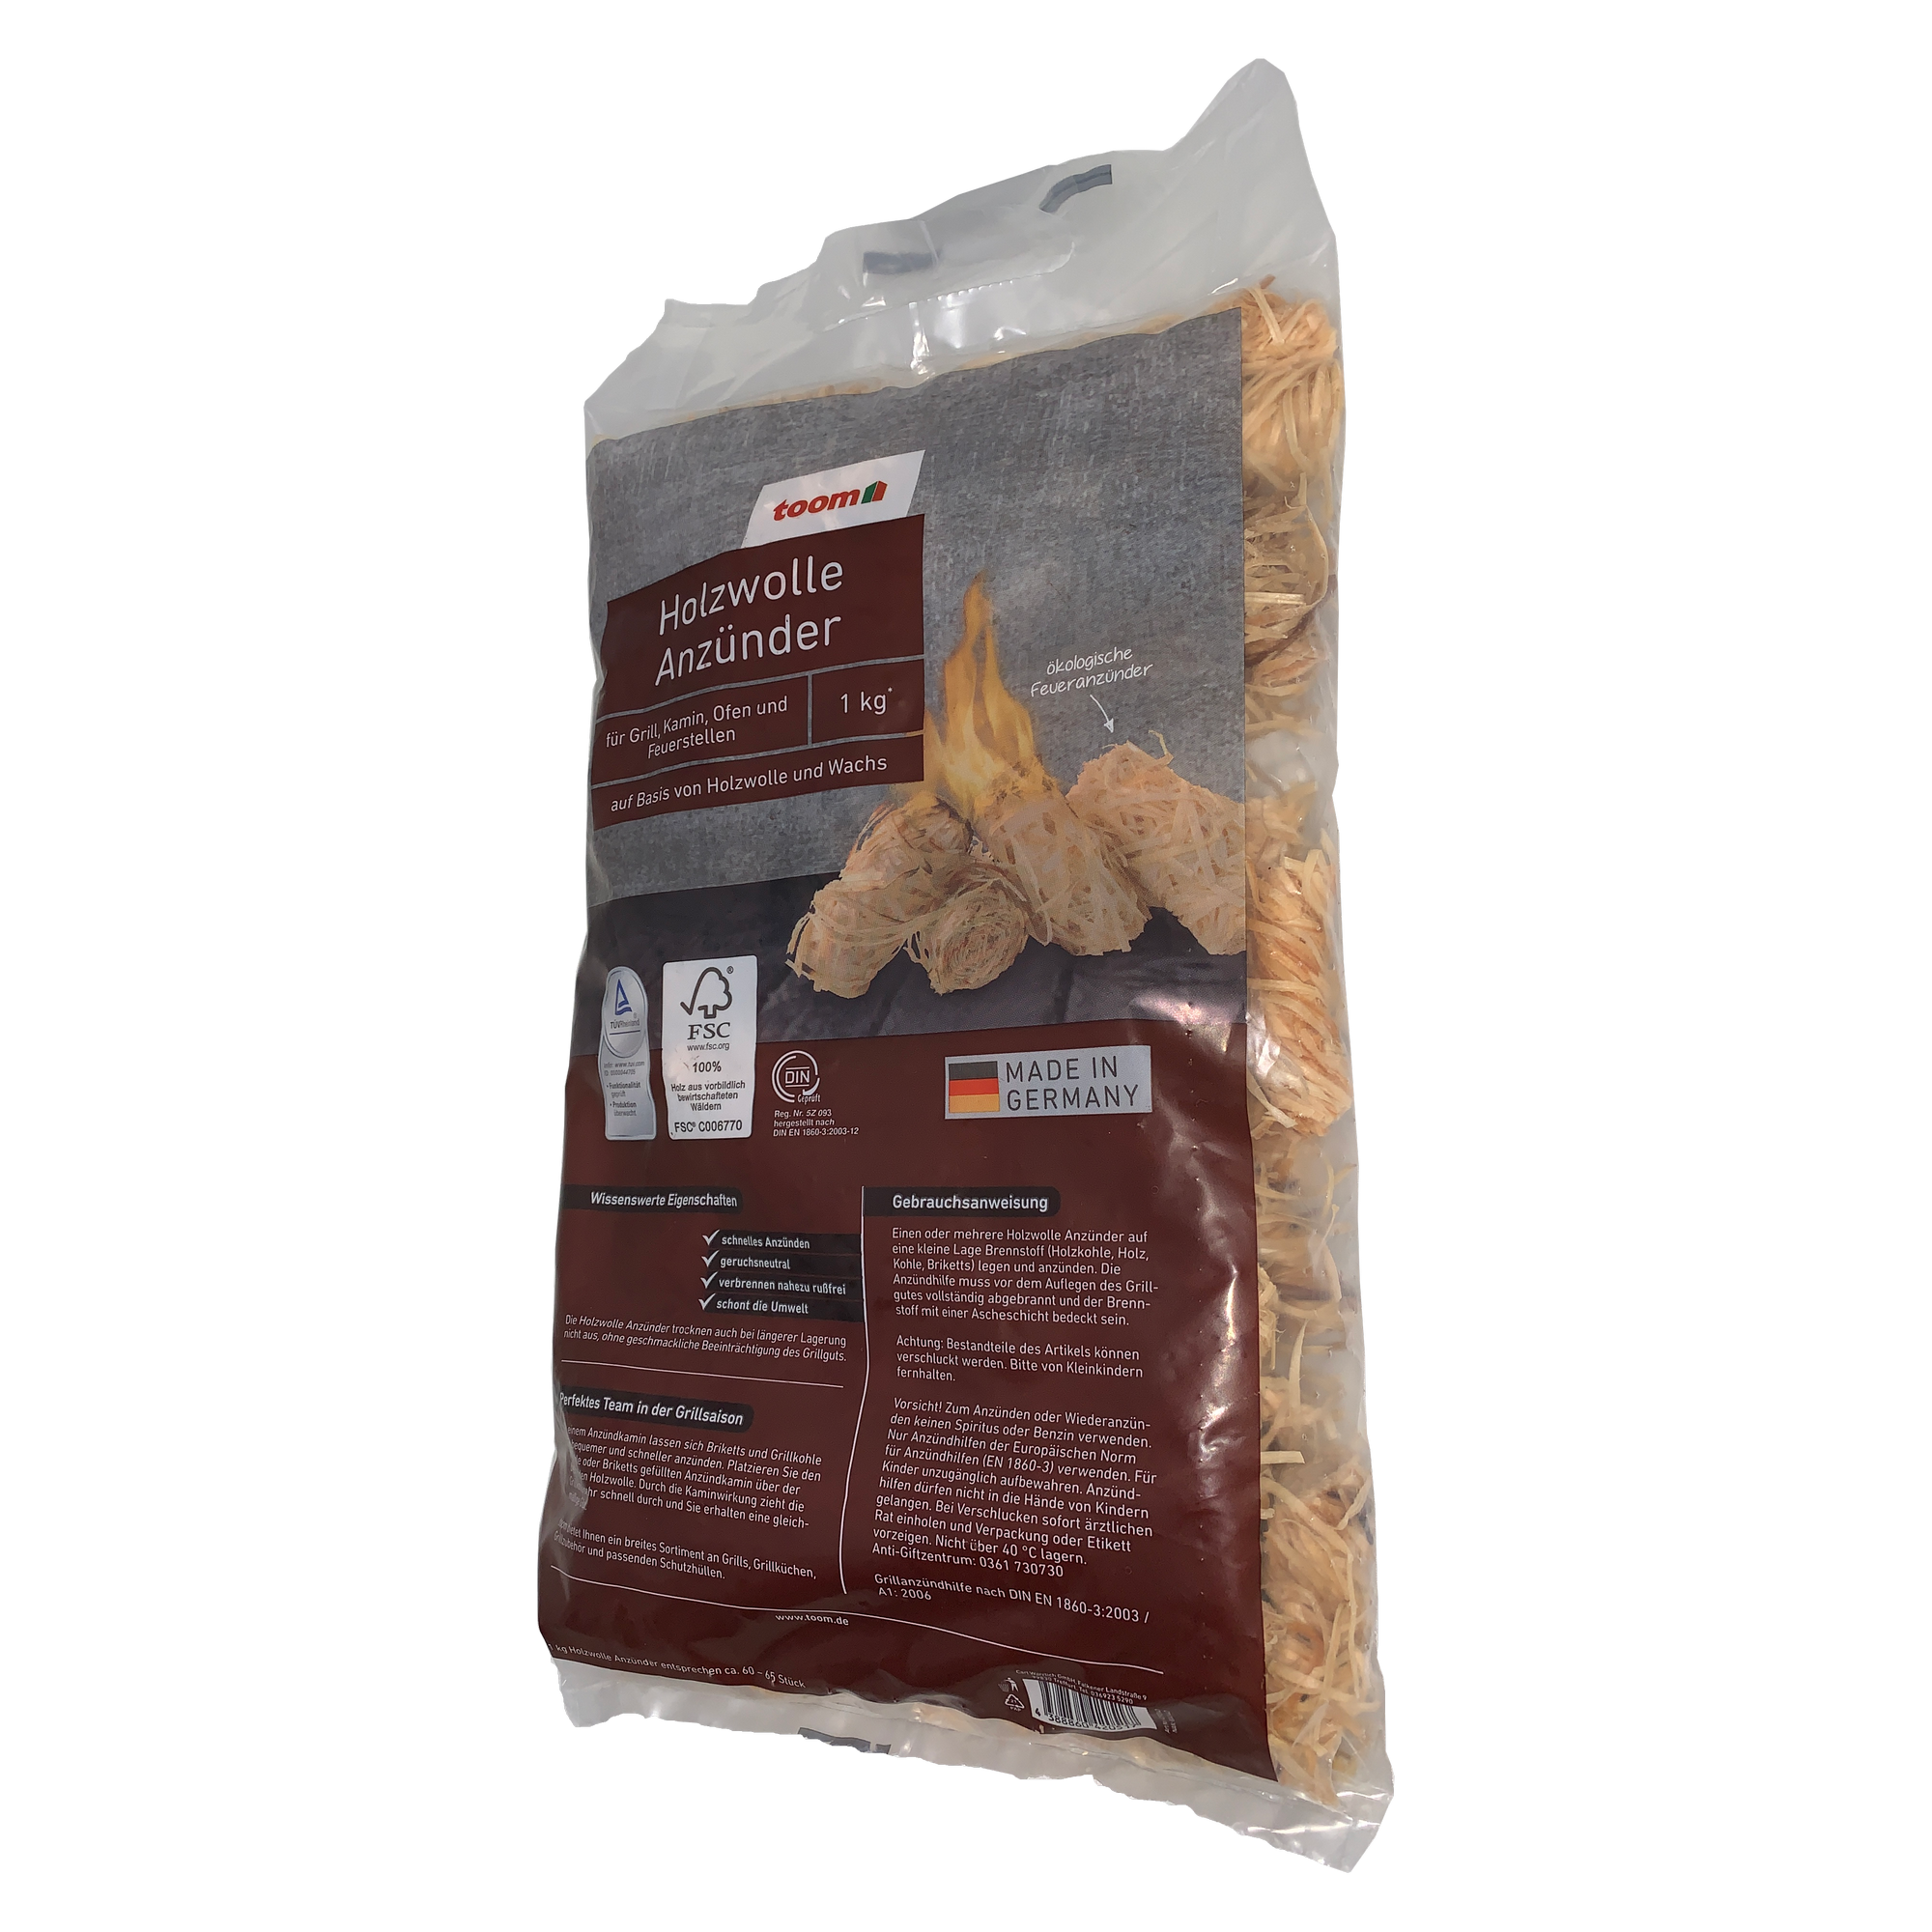 Holzwolle-Anzünder 1 kg + product picture